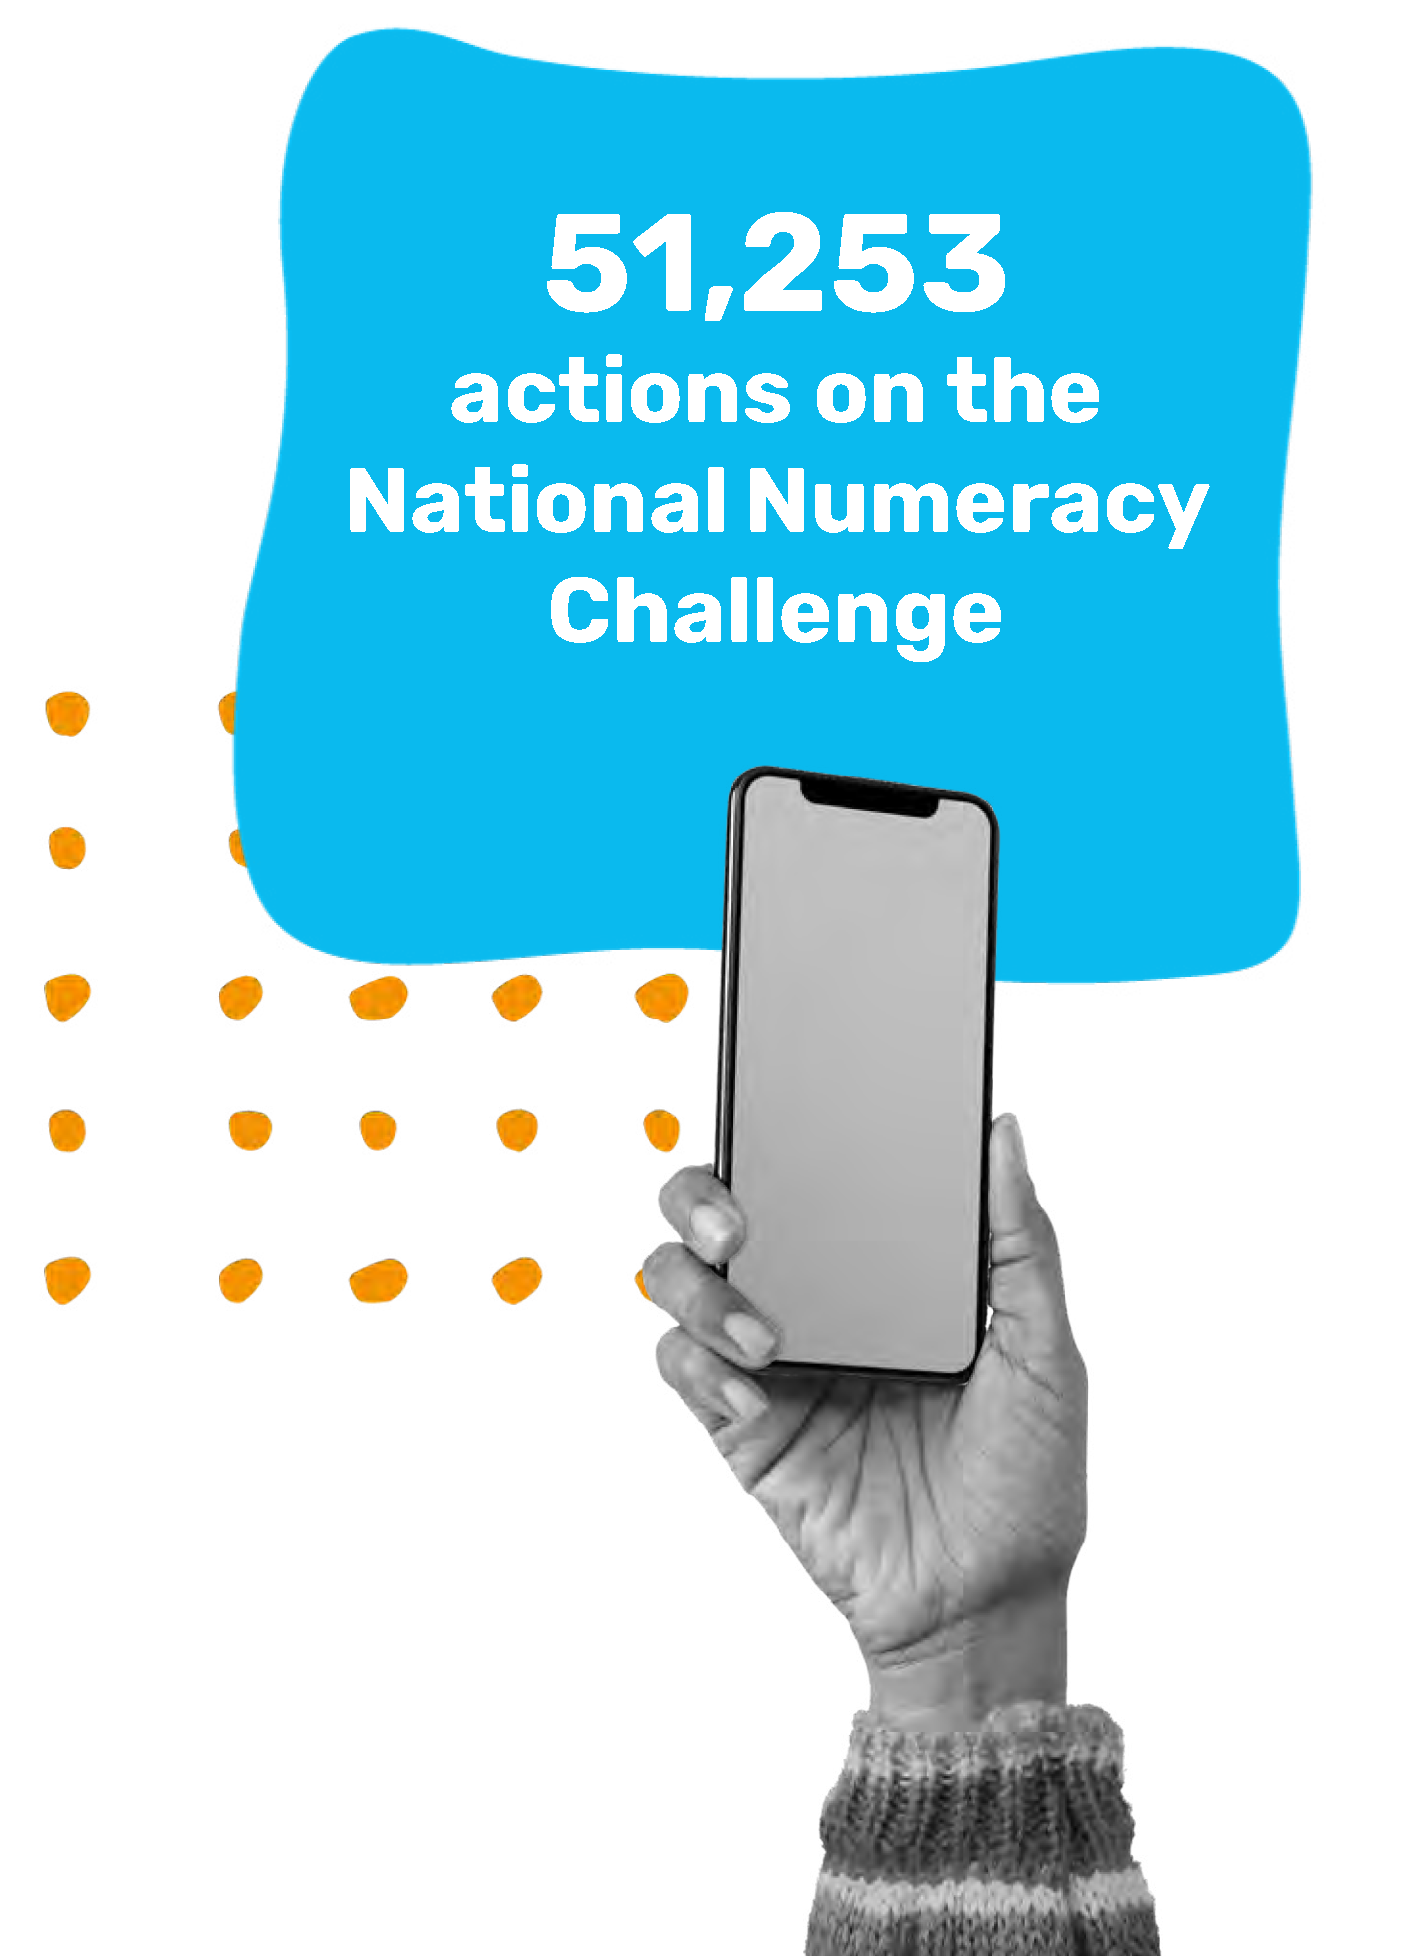 A hand holding a phone, beneath text reading "51,253 actions on the National Numeracy Challenge"